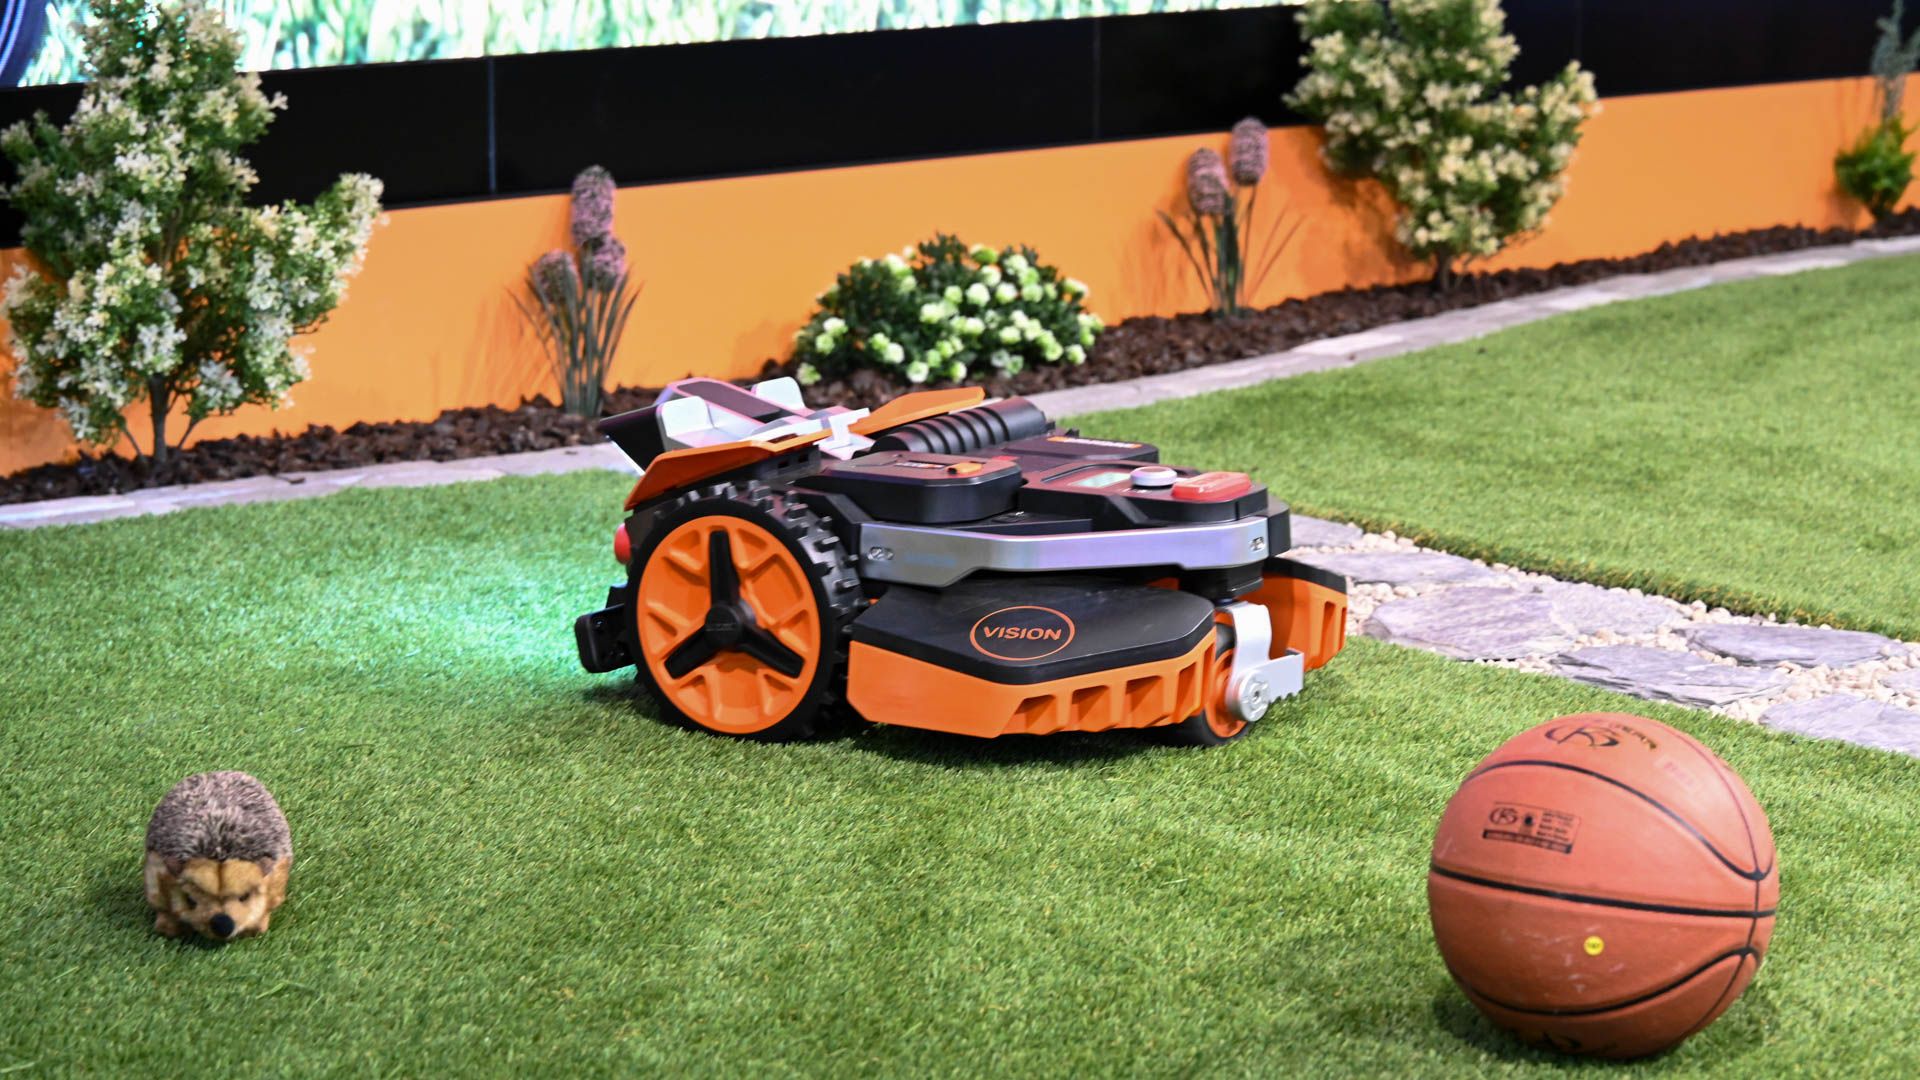 Worx Landroid Vision Lawn Mower at CES 2023